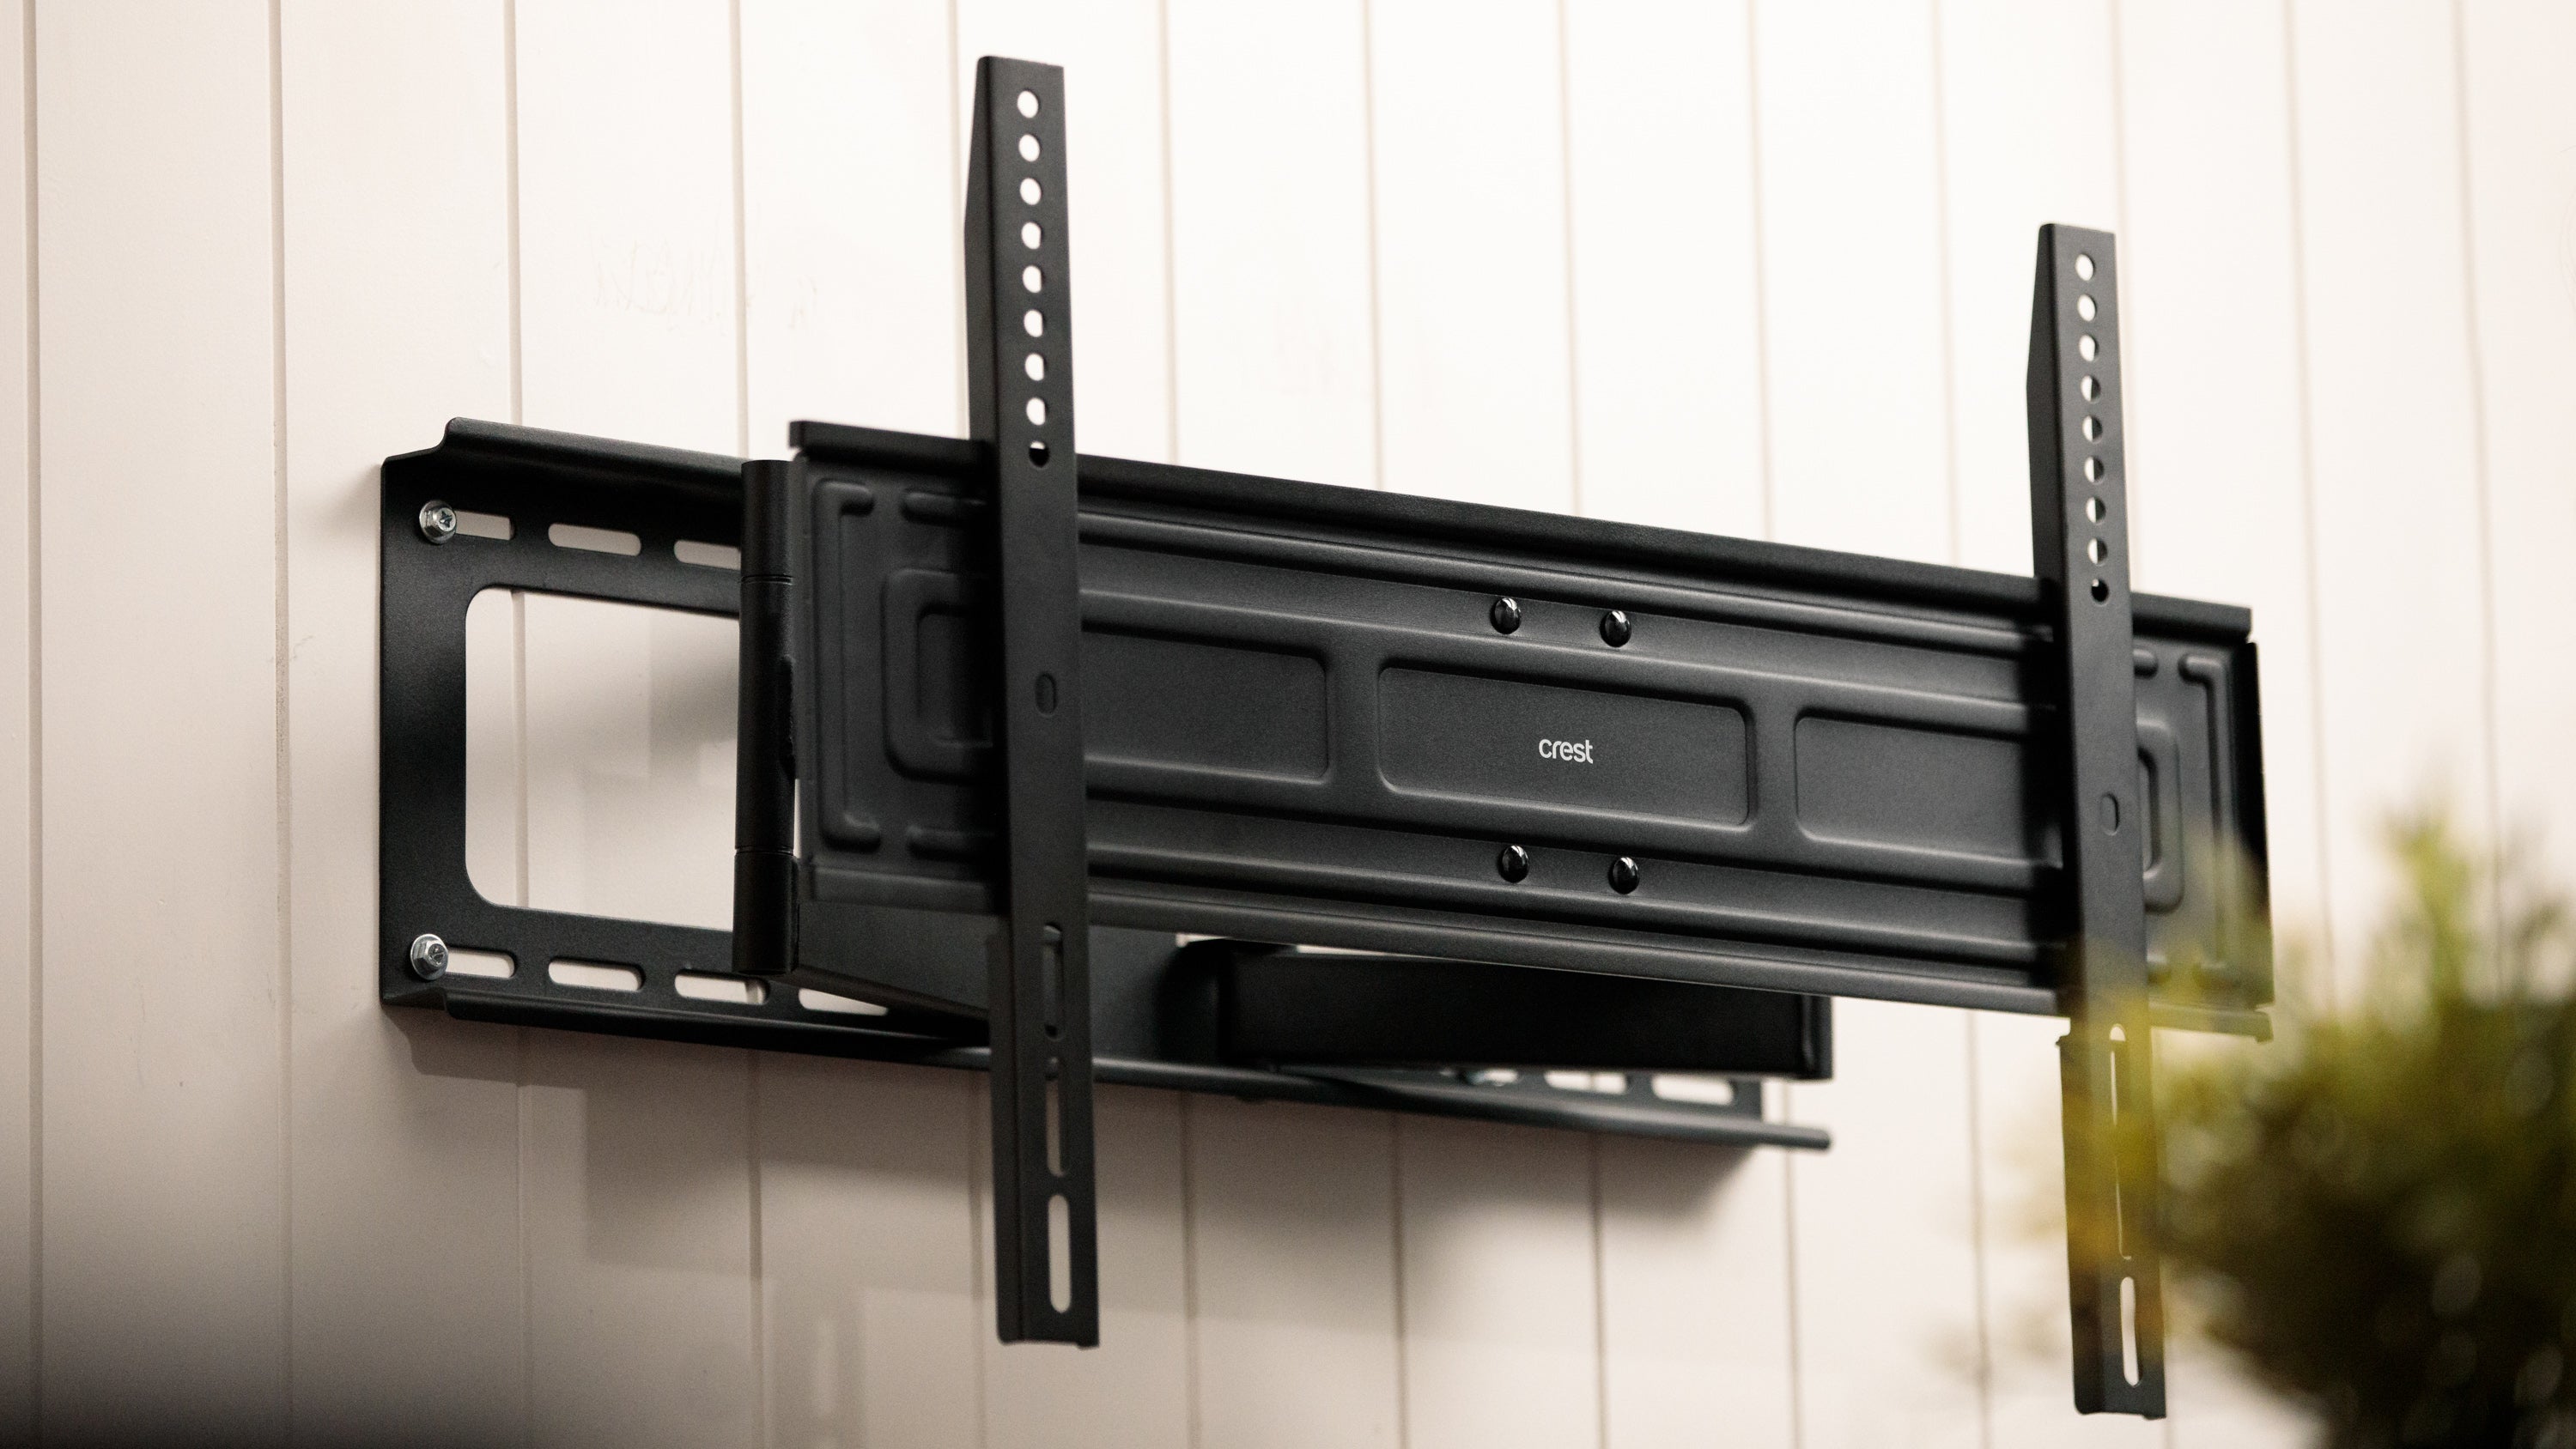 What is a full motion TV wall mount?